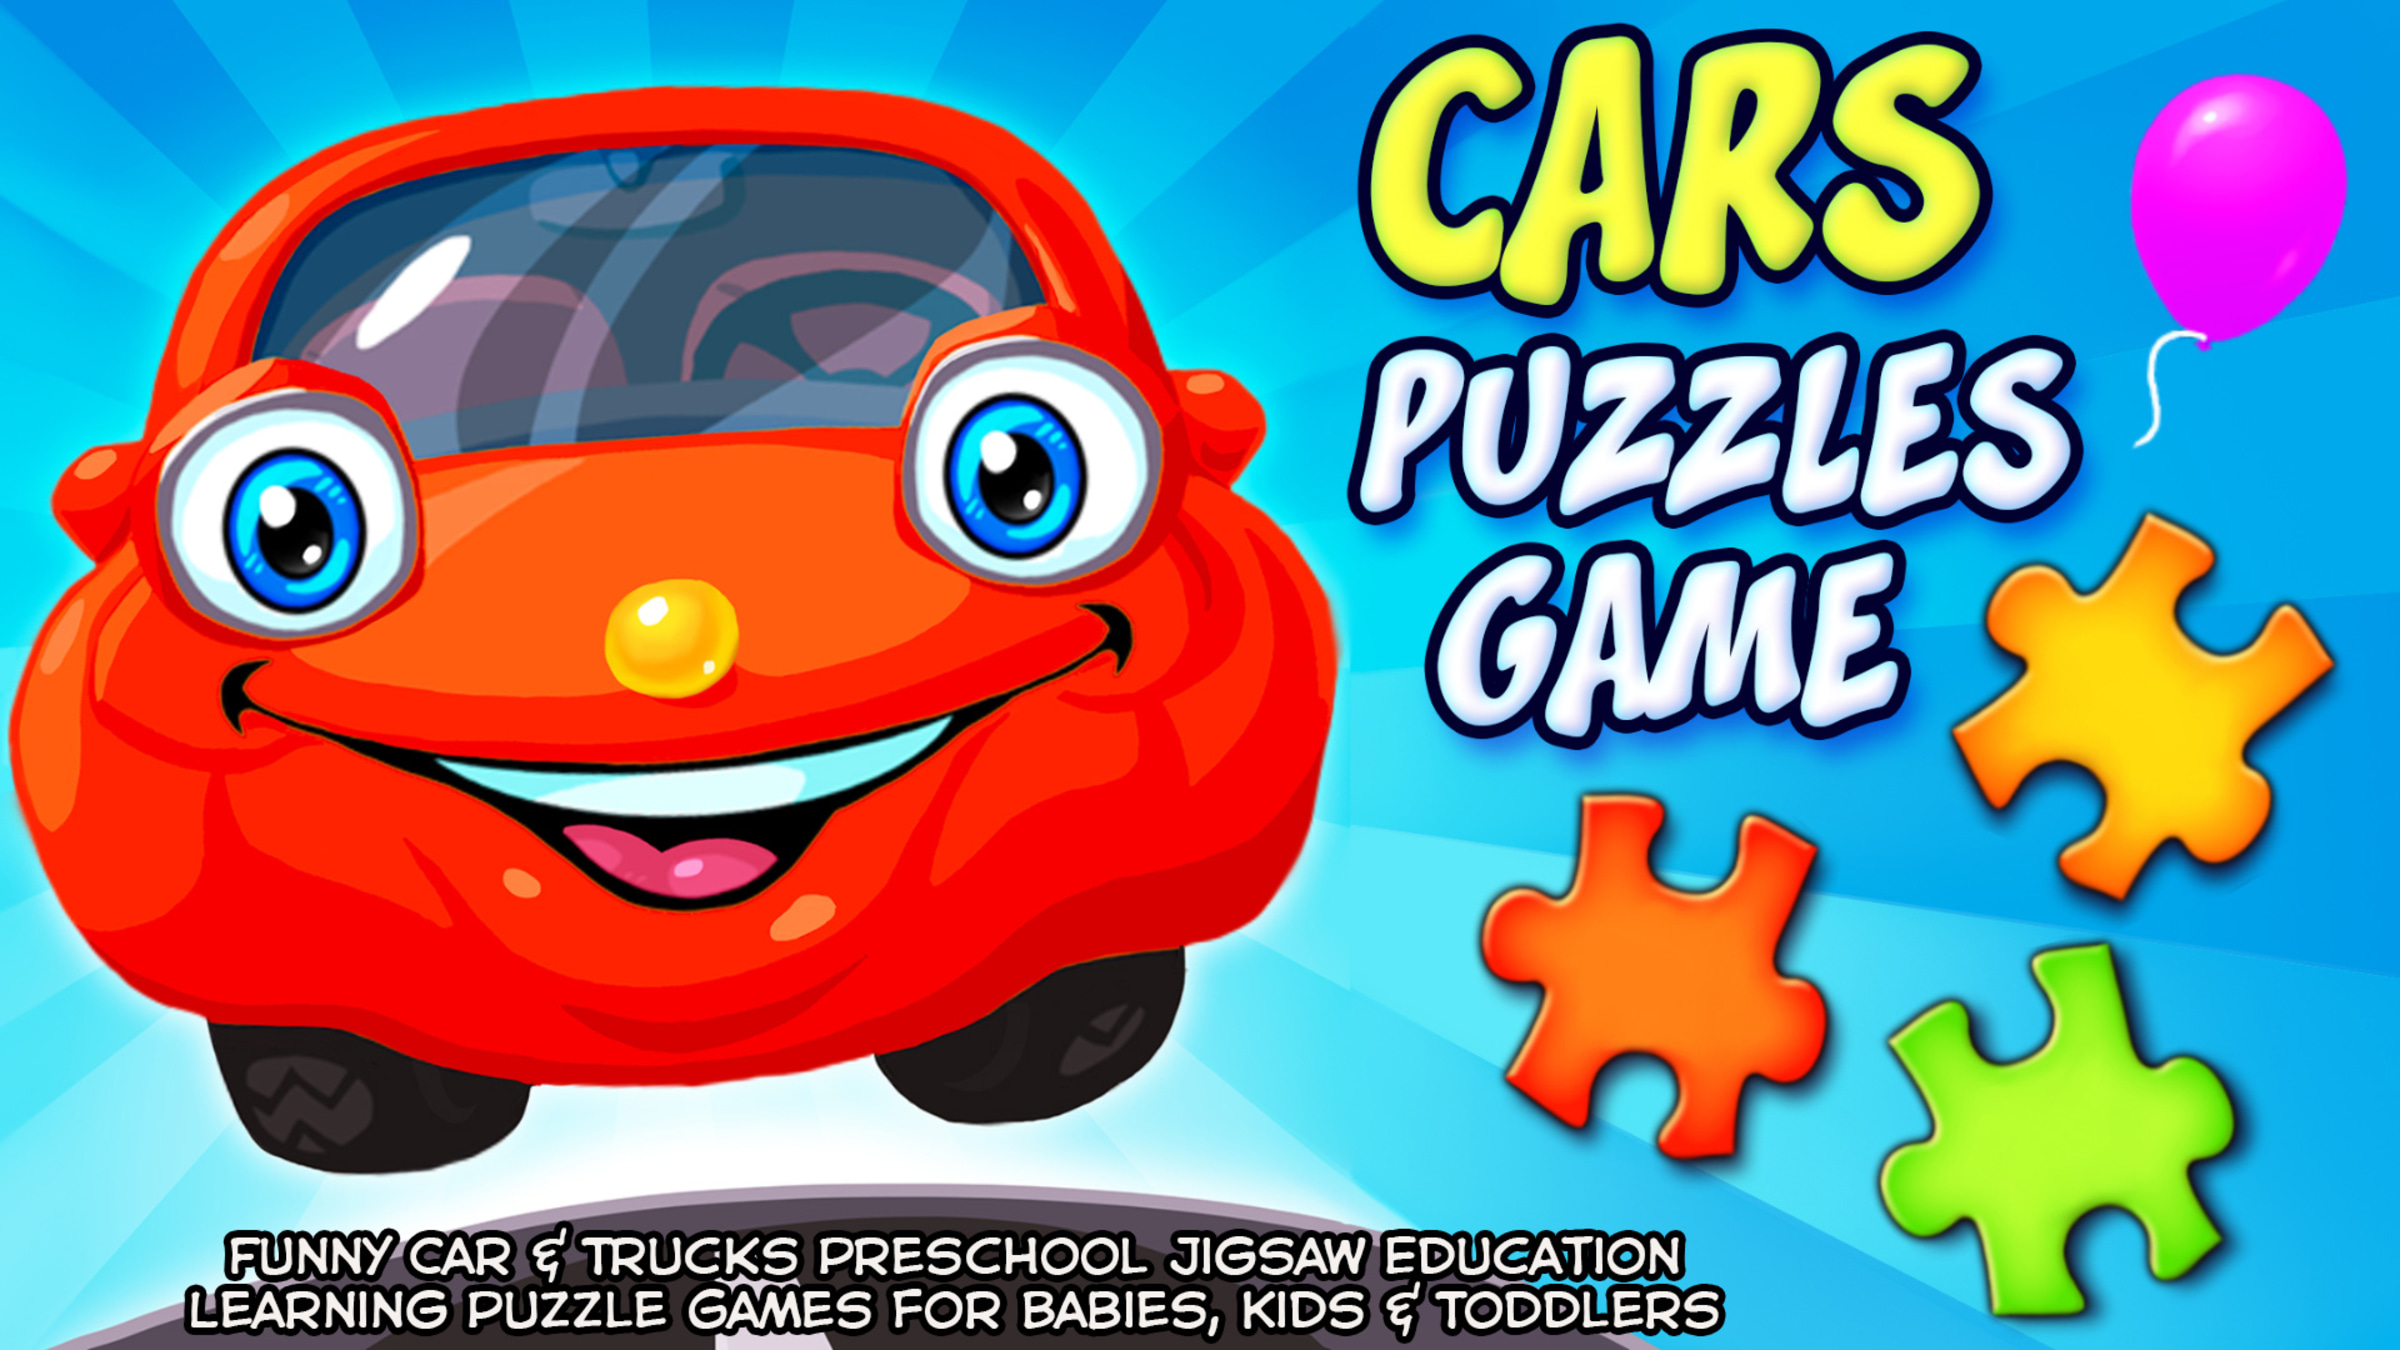 Cars Puzzles Game - Funny Car & Trucks Preschool Jigsaw Education Learning Puzzle  Games for Babies, Kids & Toddlers for Nintendo Switch - Nintendo Official  Site